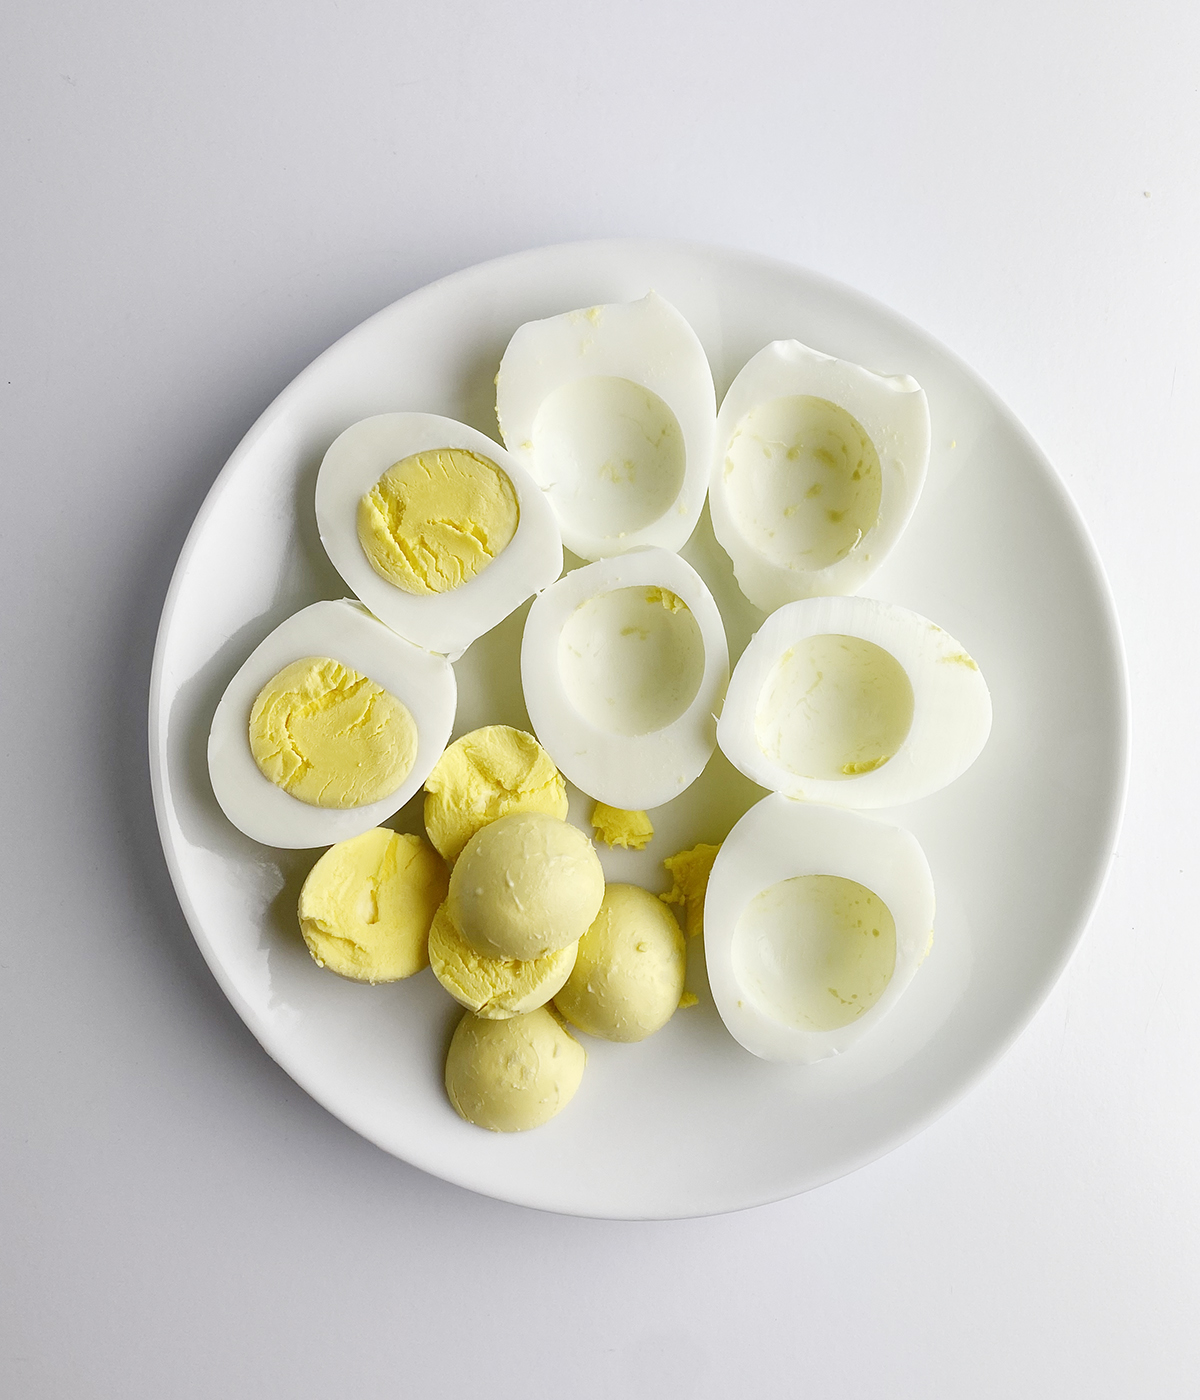 Hard boiled eggs with the yolks being removed.